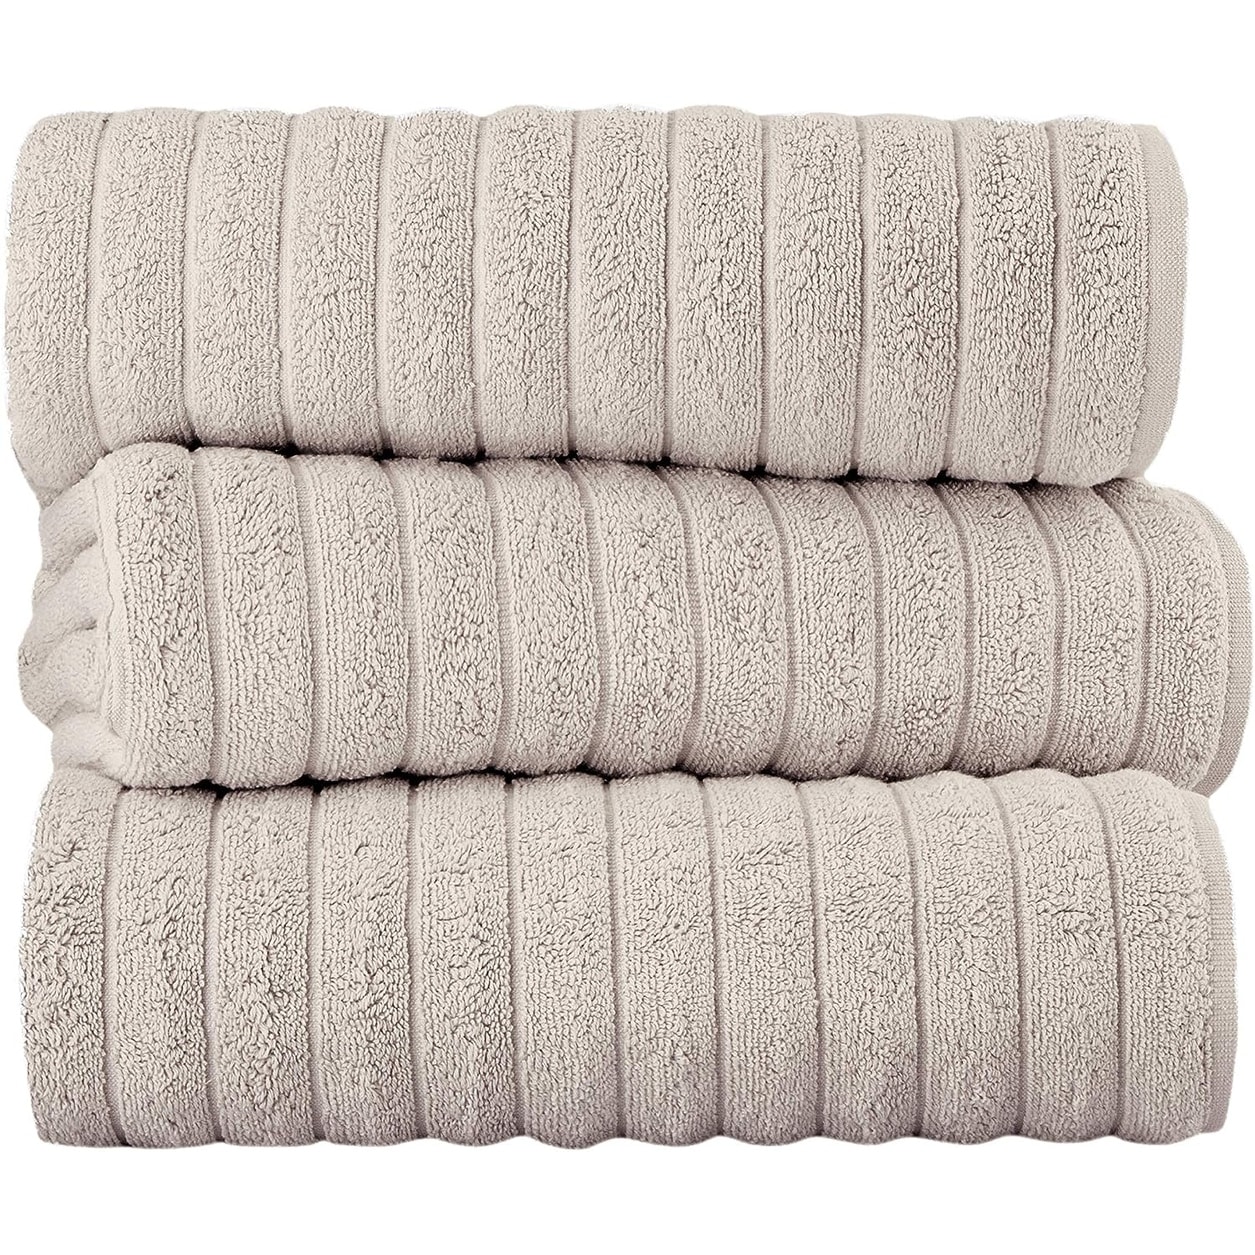 https://ak1.ostkcdn.com/images/products/is/images/direct/4dff29164bb47145ae05983d14867e0085a234ef/Classic-Turkish-Towels-Plush-Ribbed-Cotton-Luxurious-Bath-Sheets-%28Set-of-3%29-40x65%22.jpg